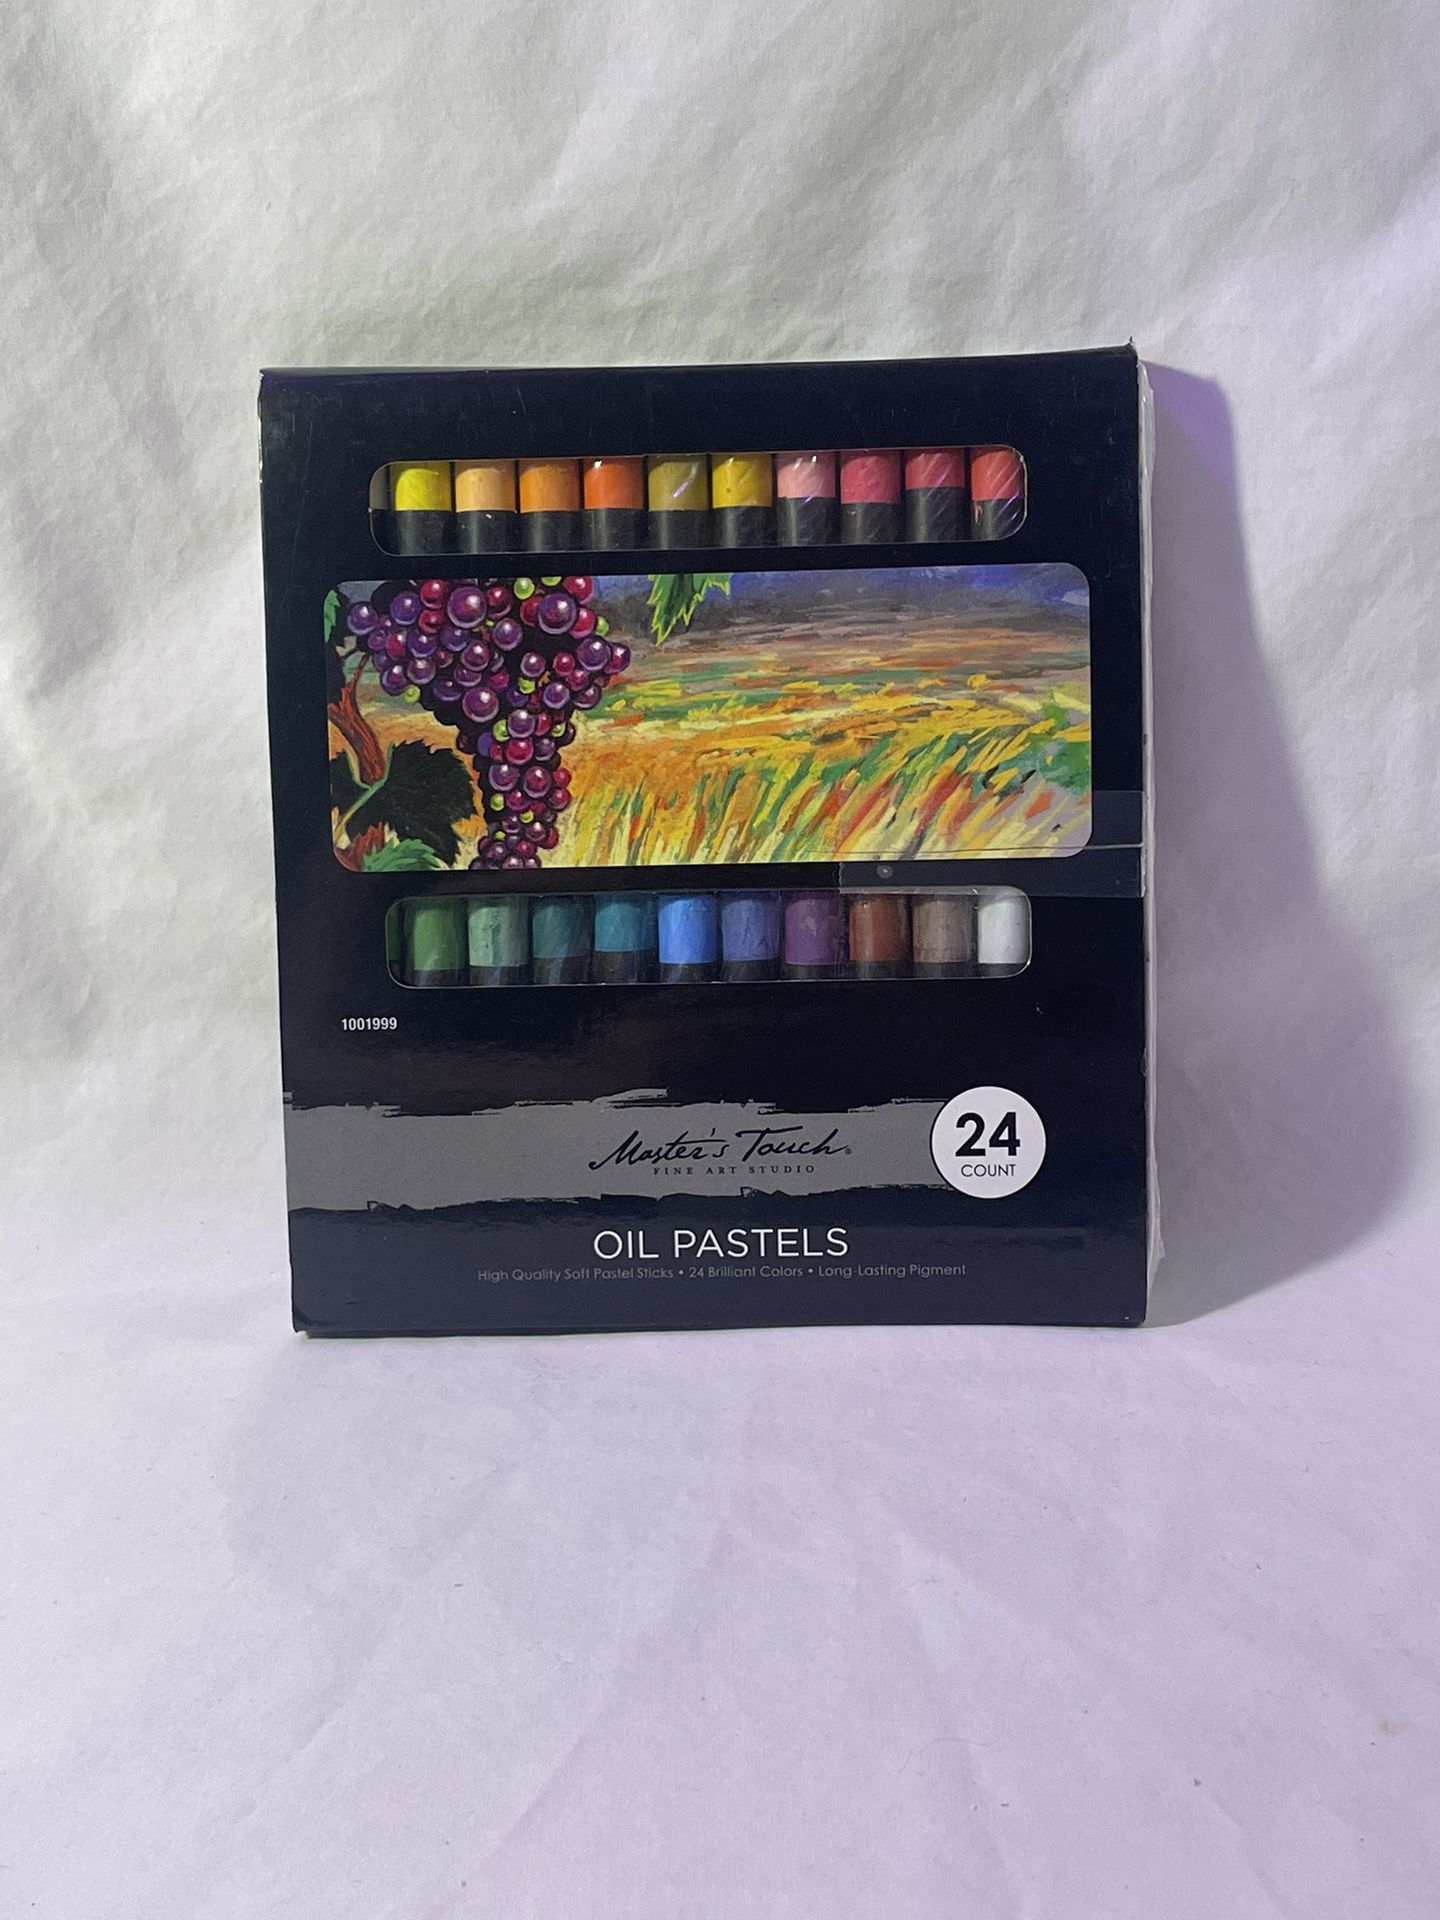 Masters Touch Premium Soft Oil Pastels 24 Colors! BRAND NEW!